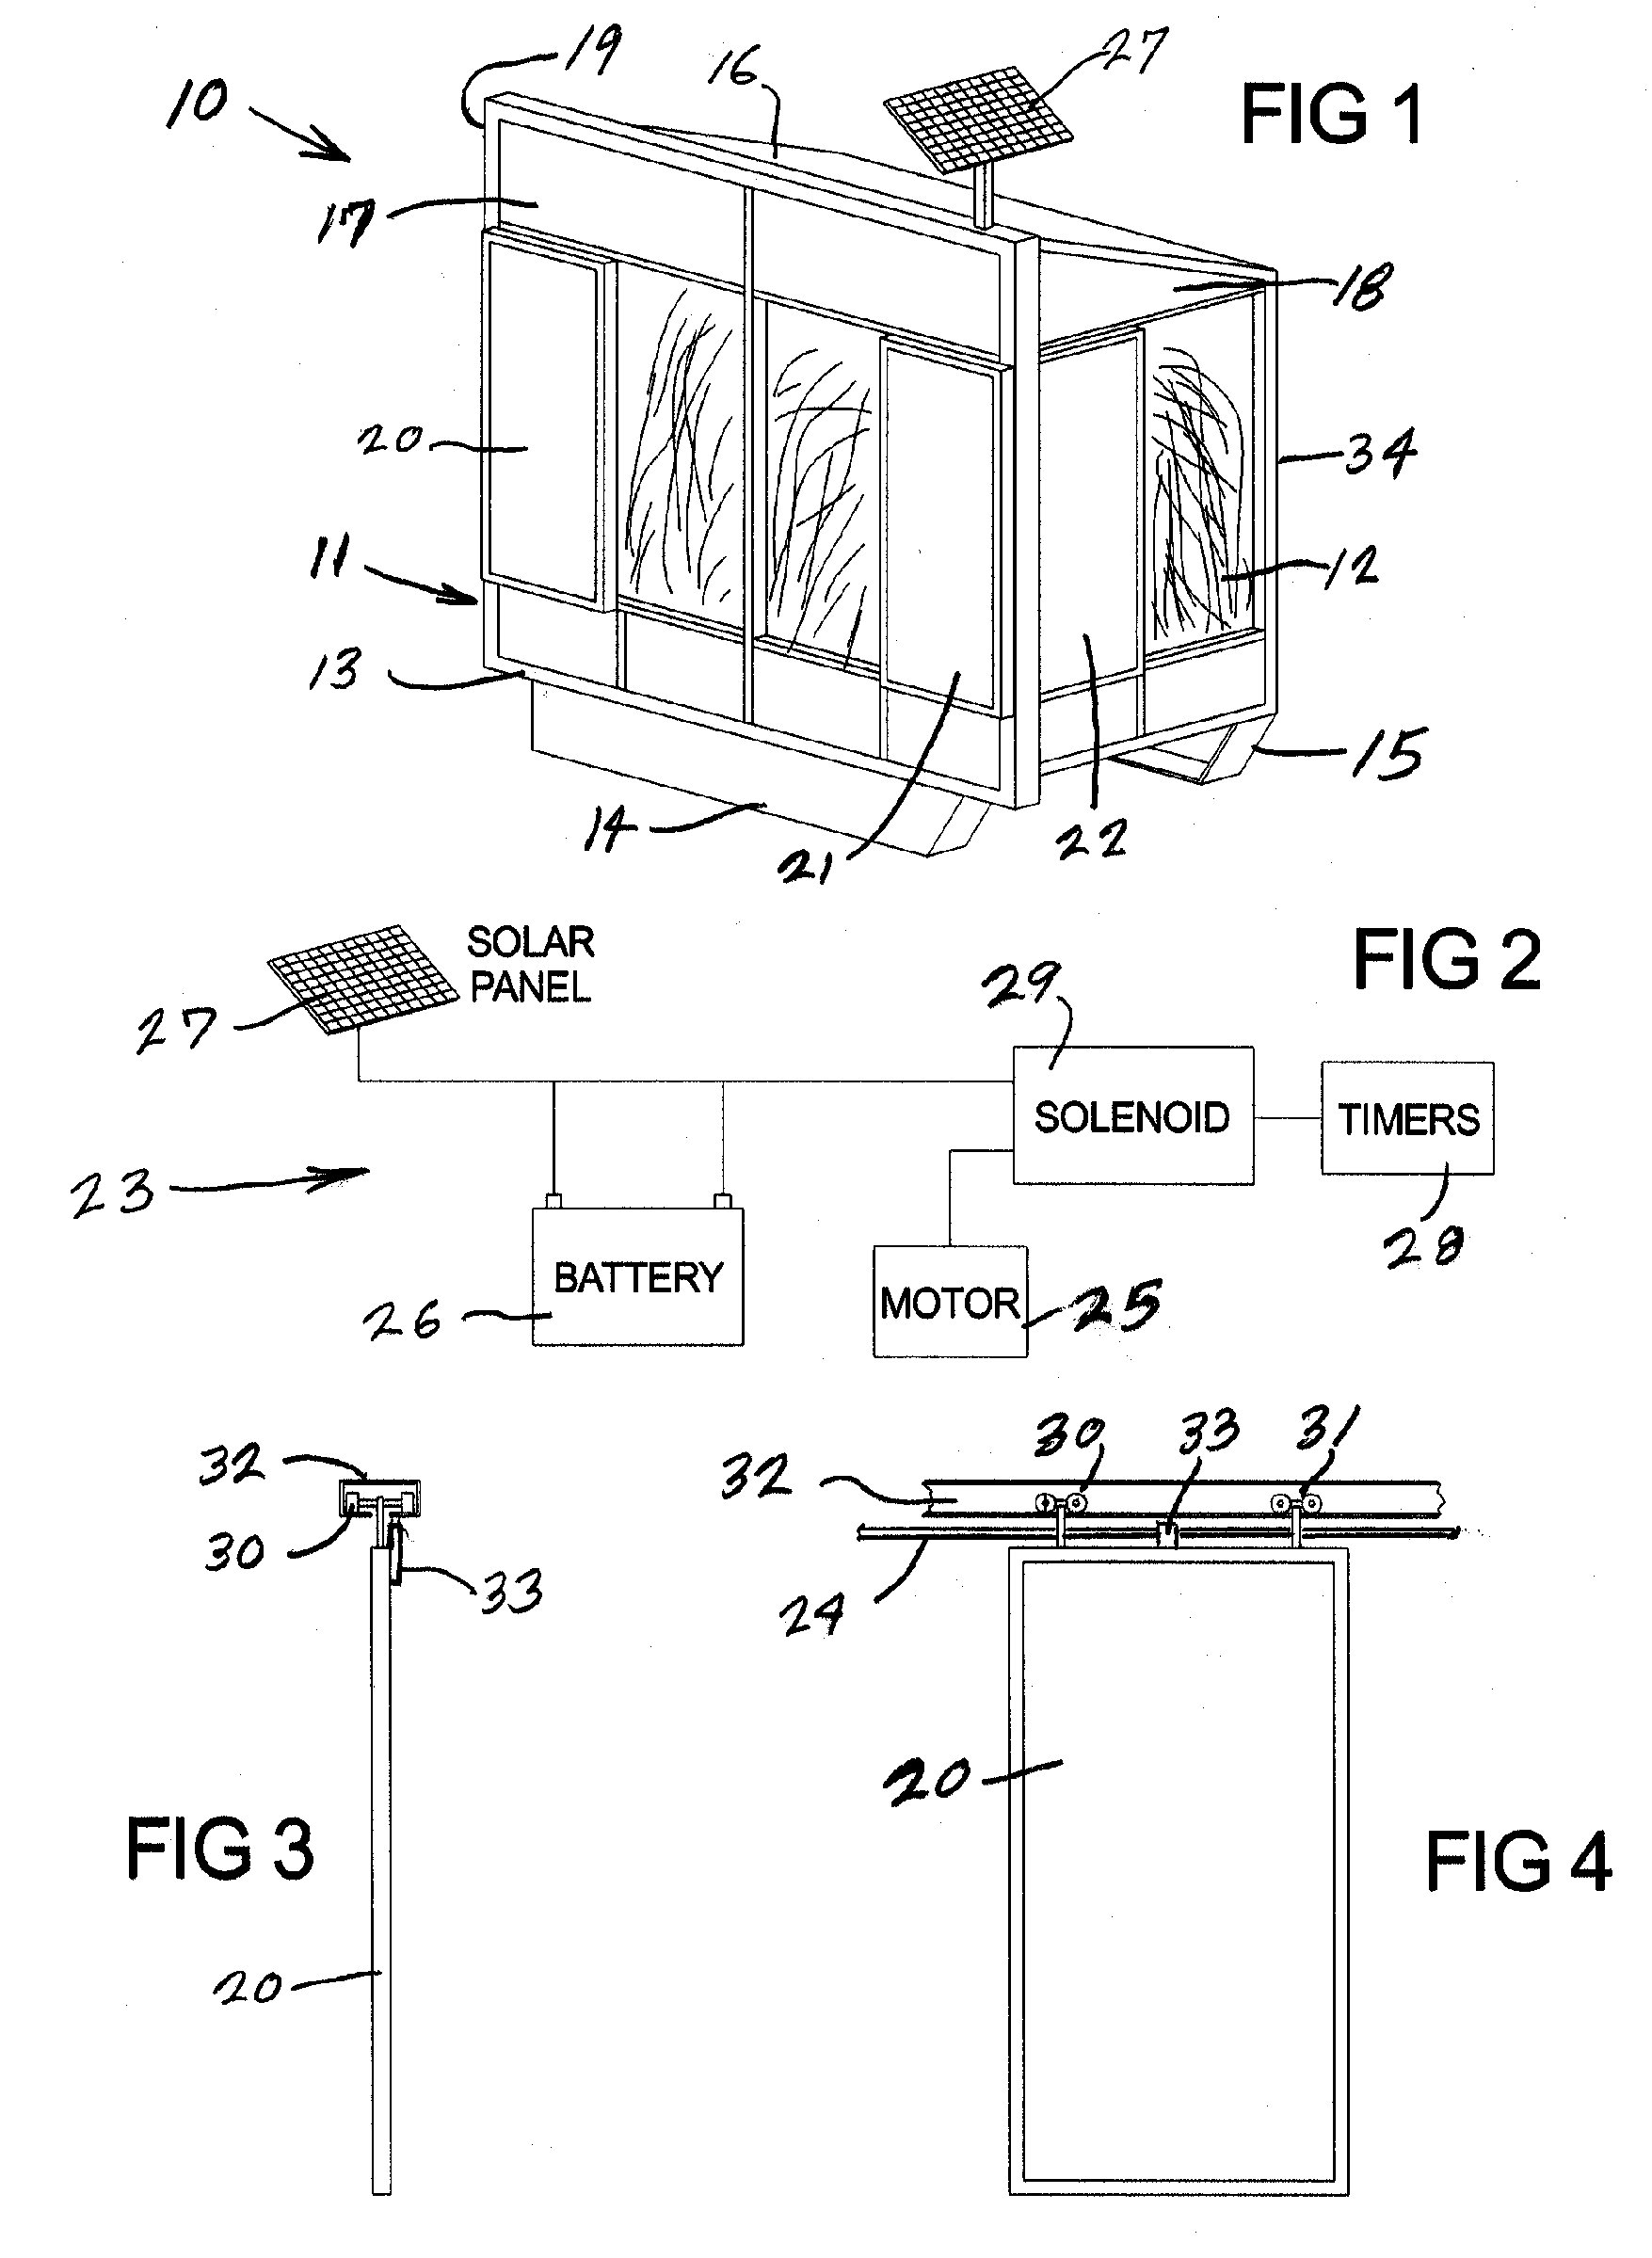 Feeder apparatus, and methods of constructing and utilizing same